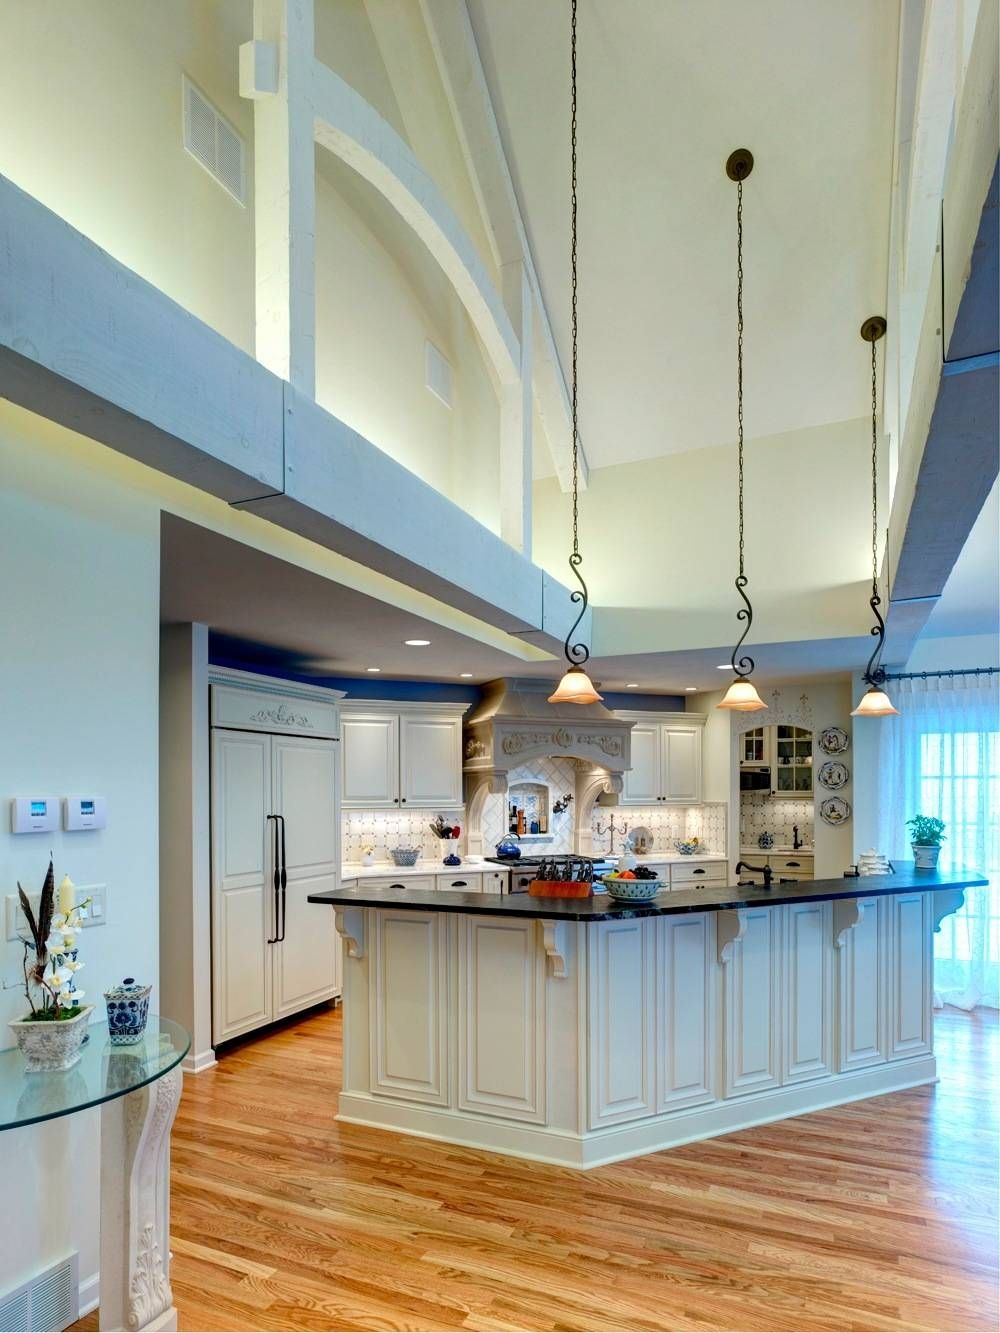 Appealing High Ceiling Images Ideas Trends With Kitchen Lighting With Regard To Pendant Lights For High Ceilings (View 3 of 15)